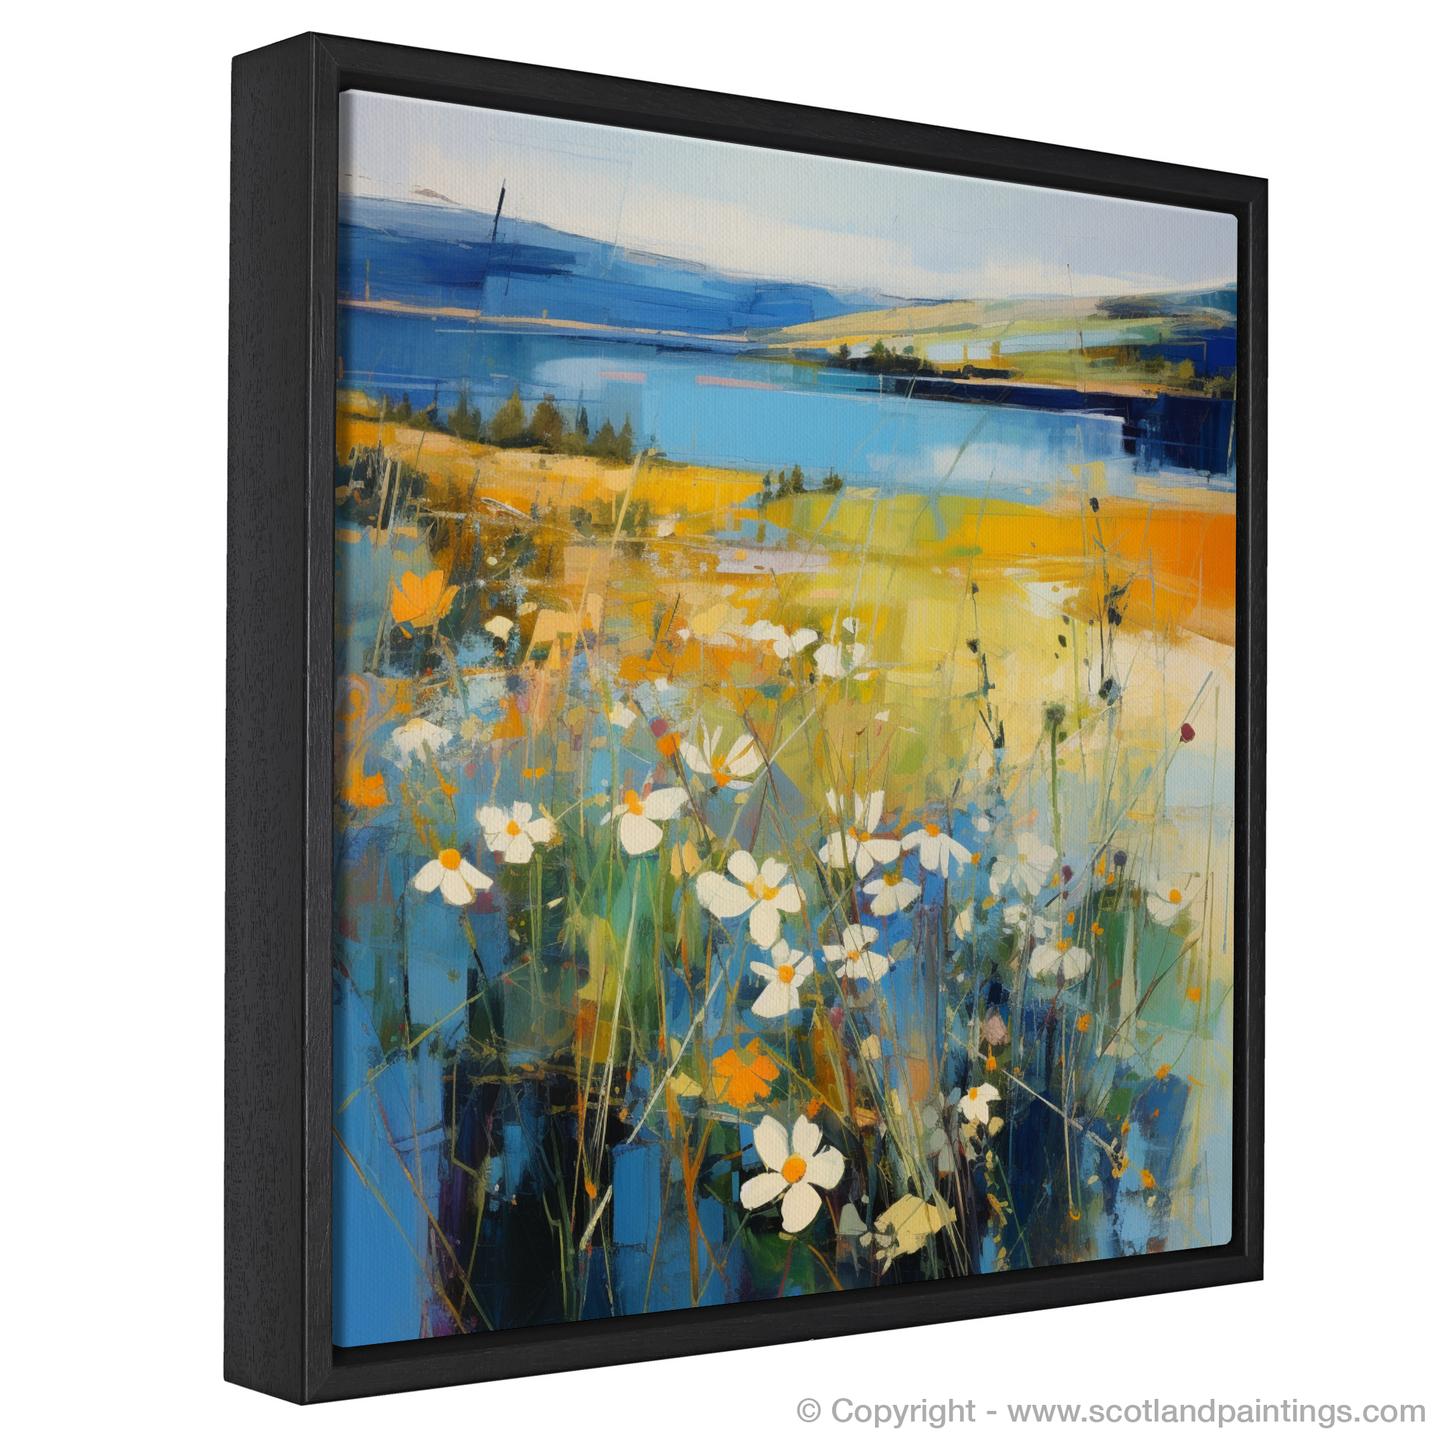 Painting and Art Print of Wildflowers by Loch Lomond entitled "Wildflowers Dance by Loch Lomond".